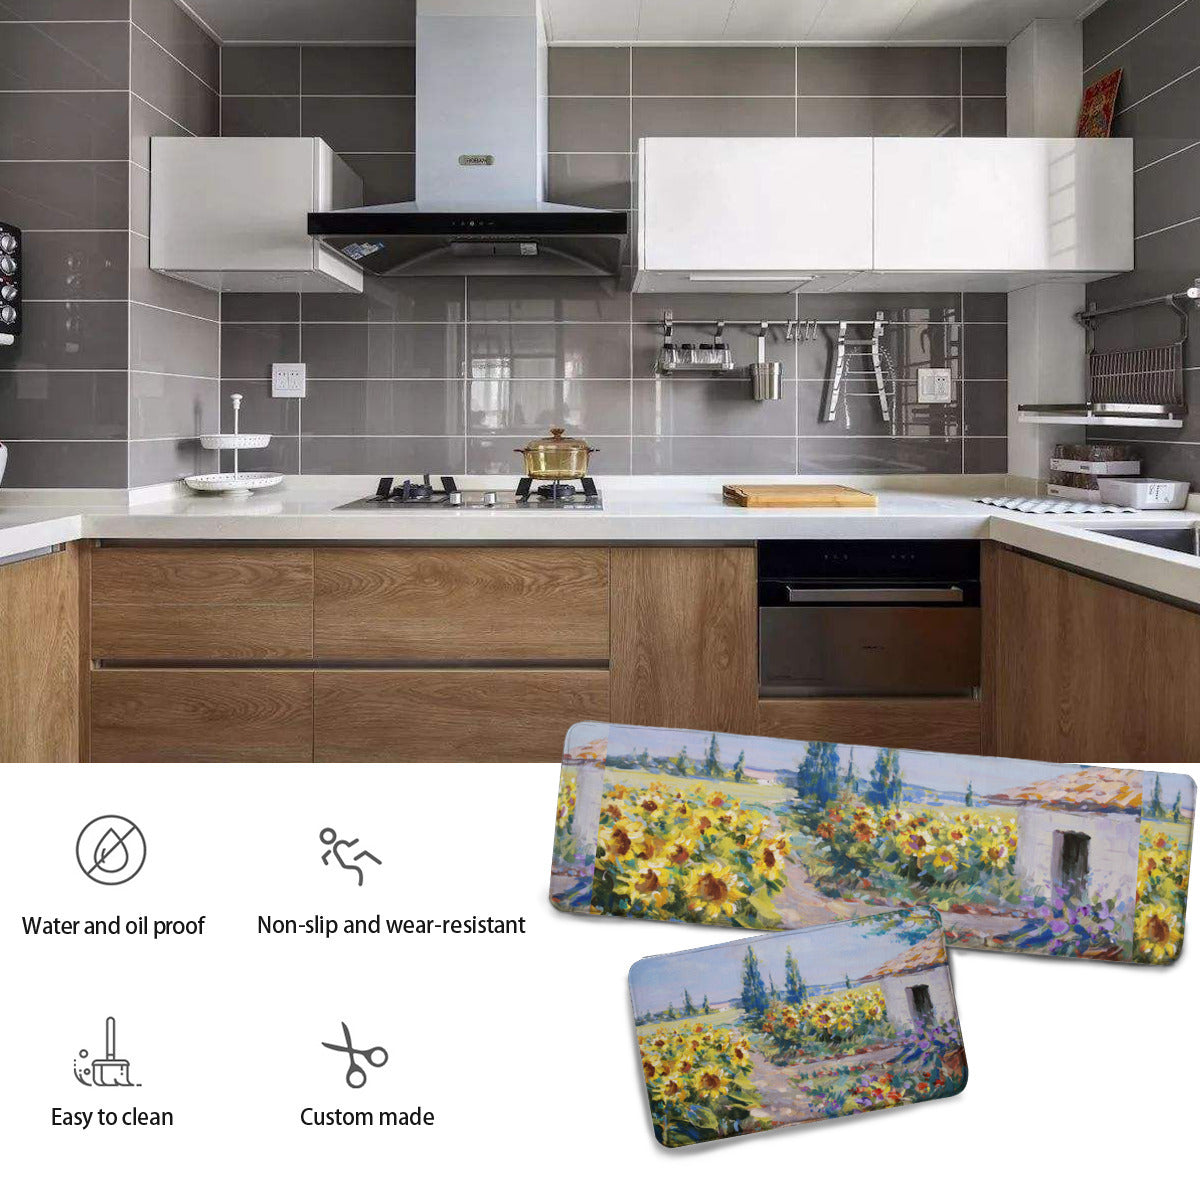 Two-piece L multifunctional kitchen mat Sunflowers | Flannel